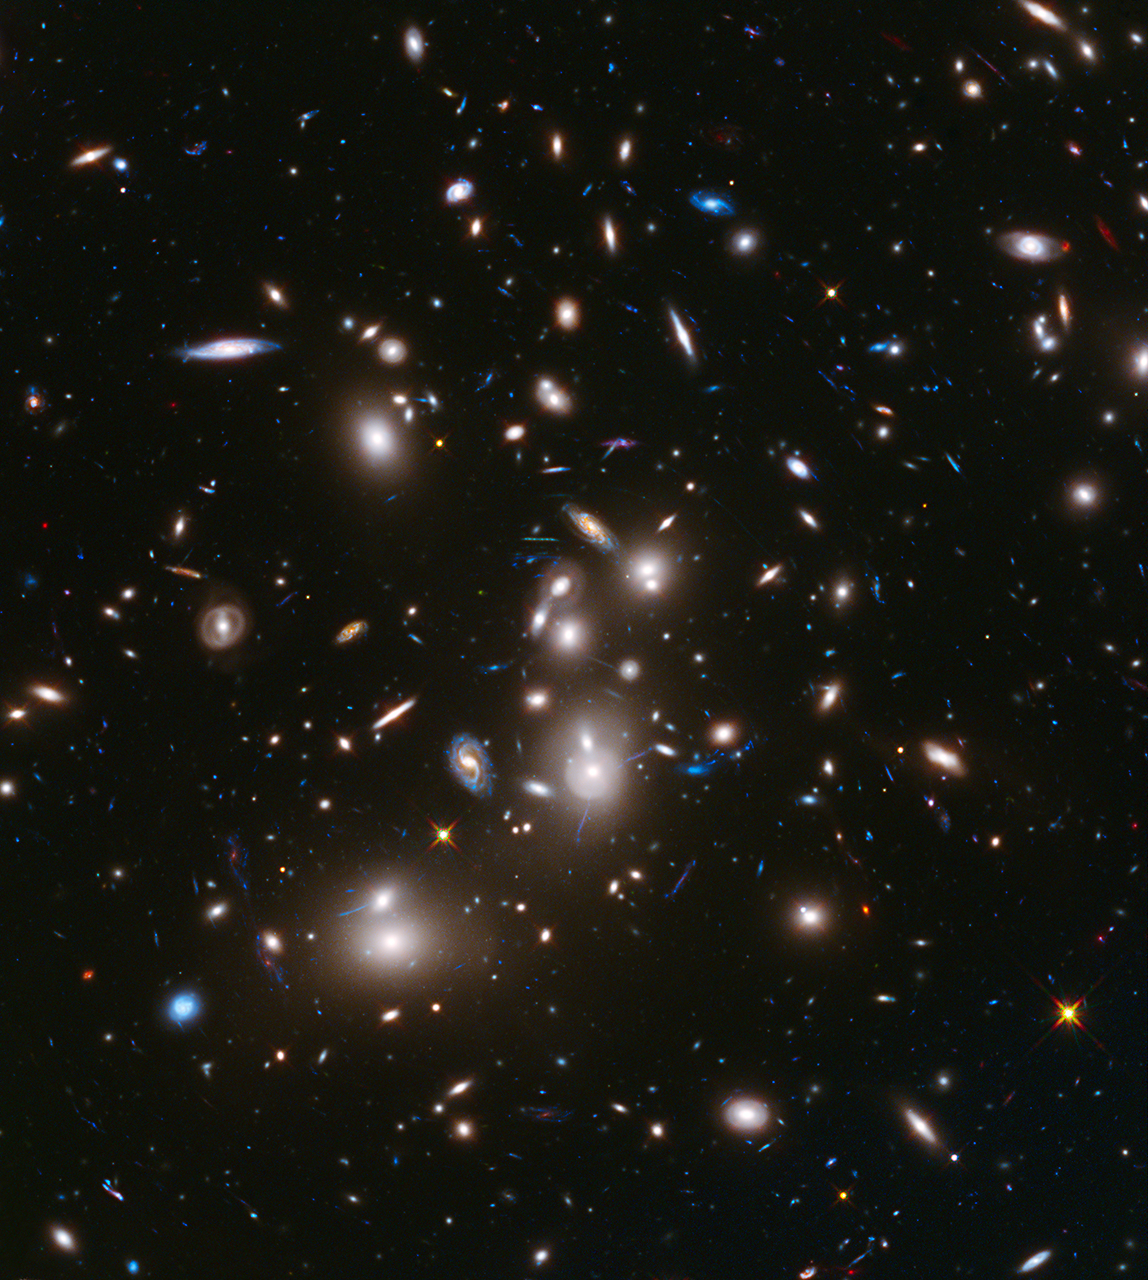 Hubble Space Telescope view of Abell 2744, a massive galaxy cluster